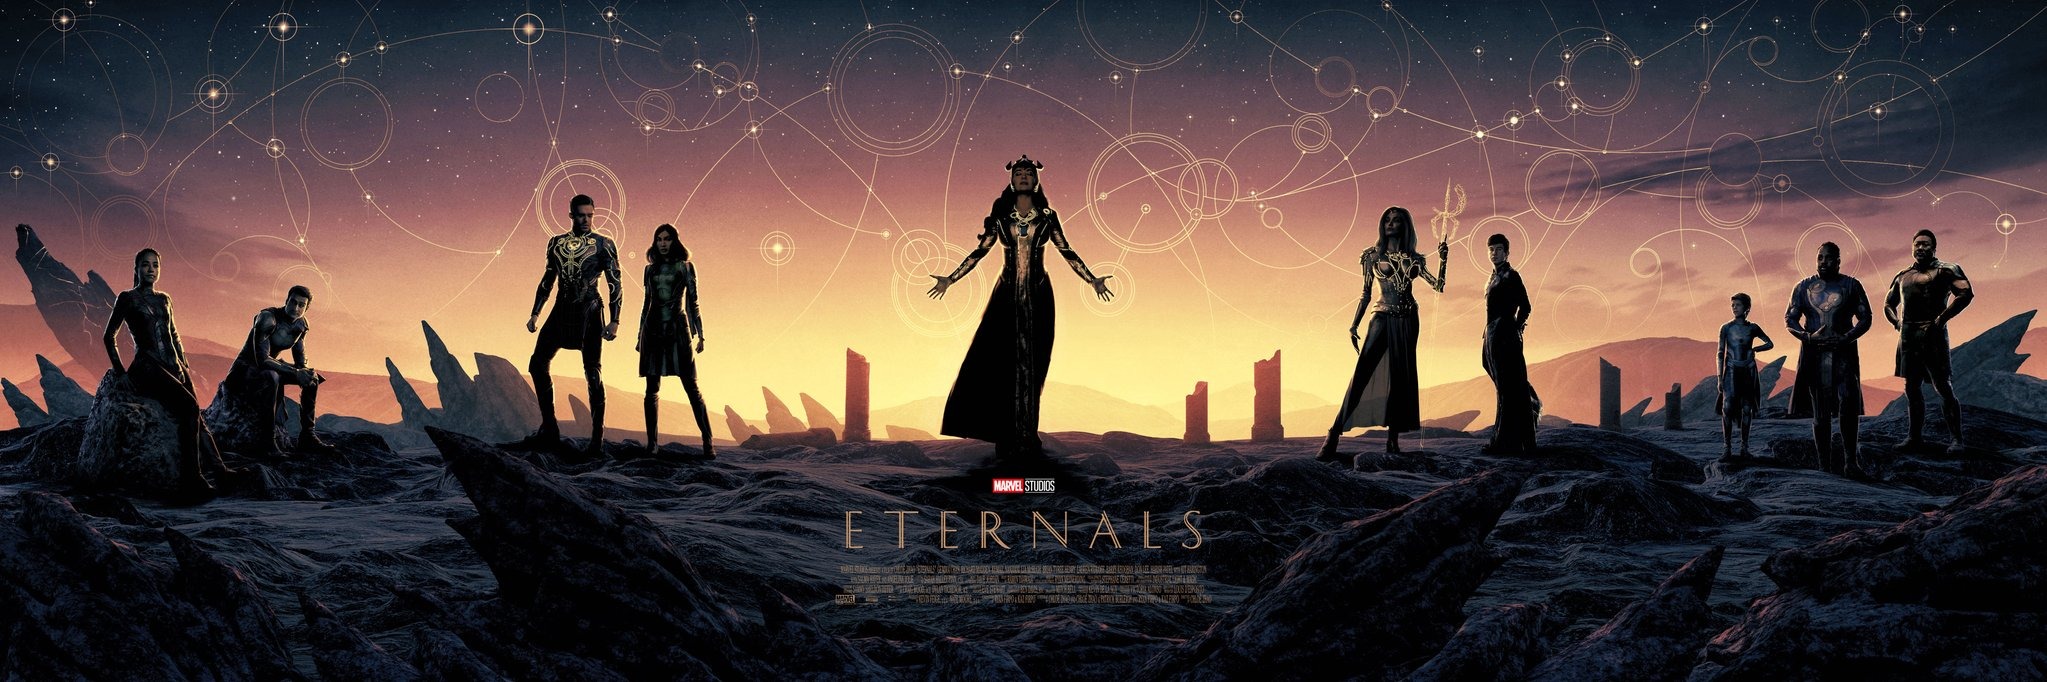 Mega Sized Movie Poster Image for Eternals (#20 of 23)